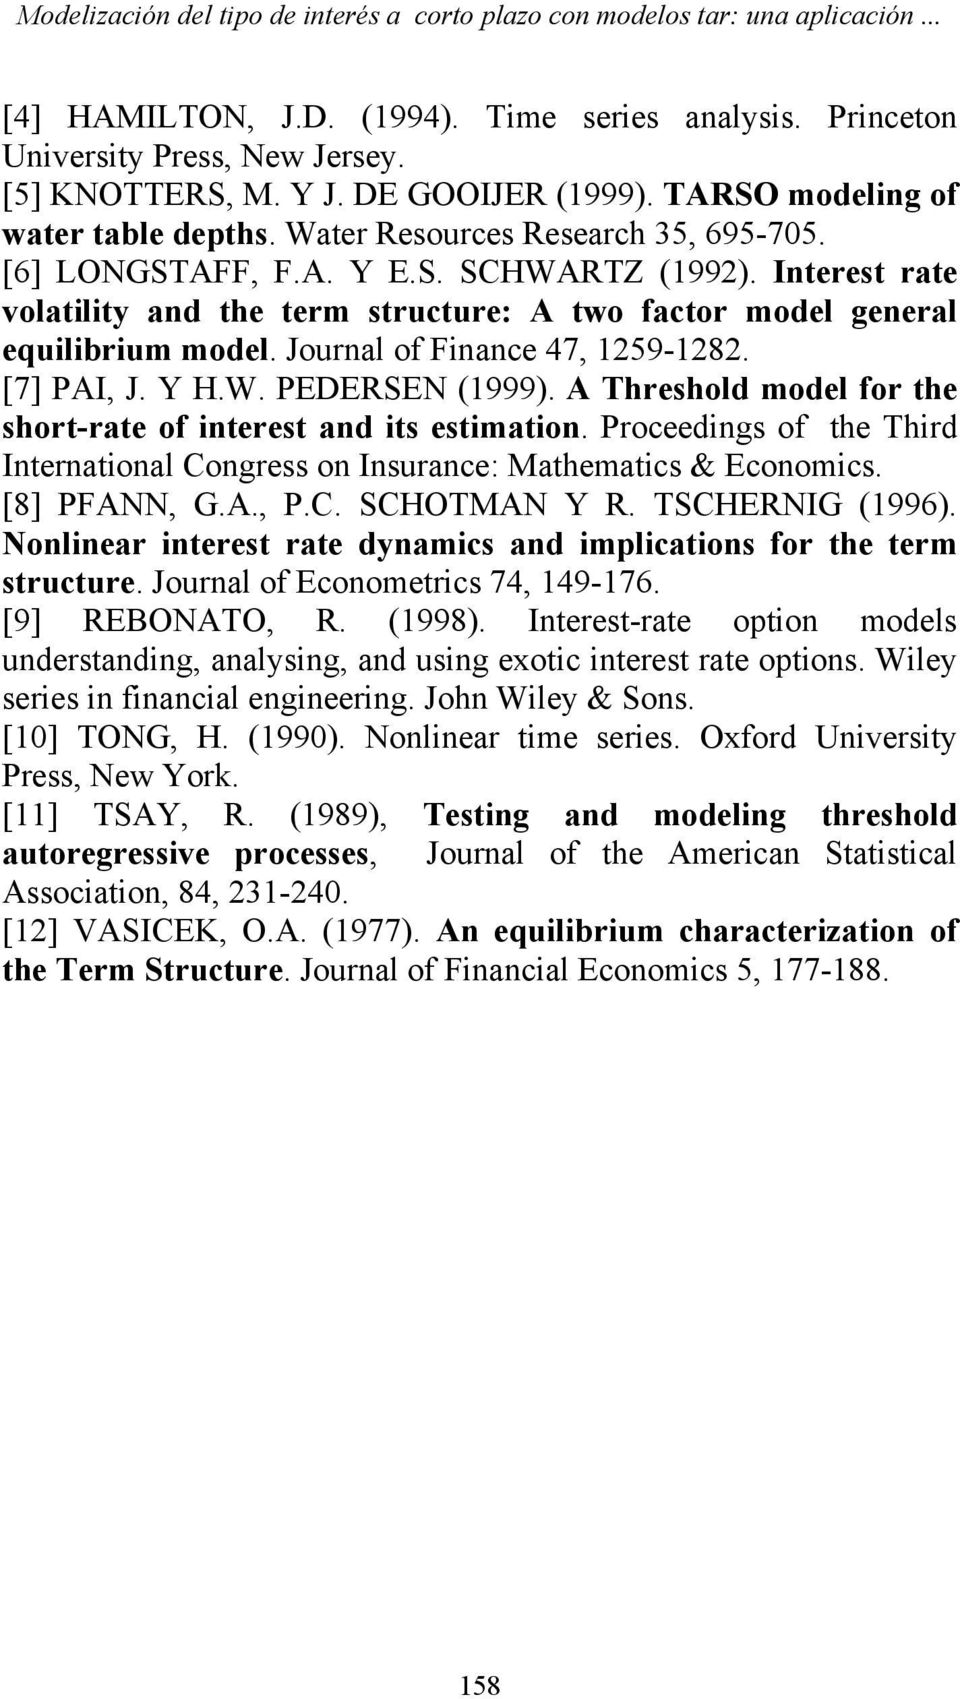 Ineres rae volailiy and he erm srucure: A wo facor model general equilibrium model. Journal of Finance 47, 1259-1282. [7] PAI, J. Y H.W. PEDERSEN (1999).